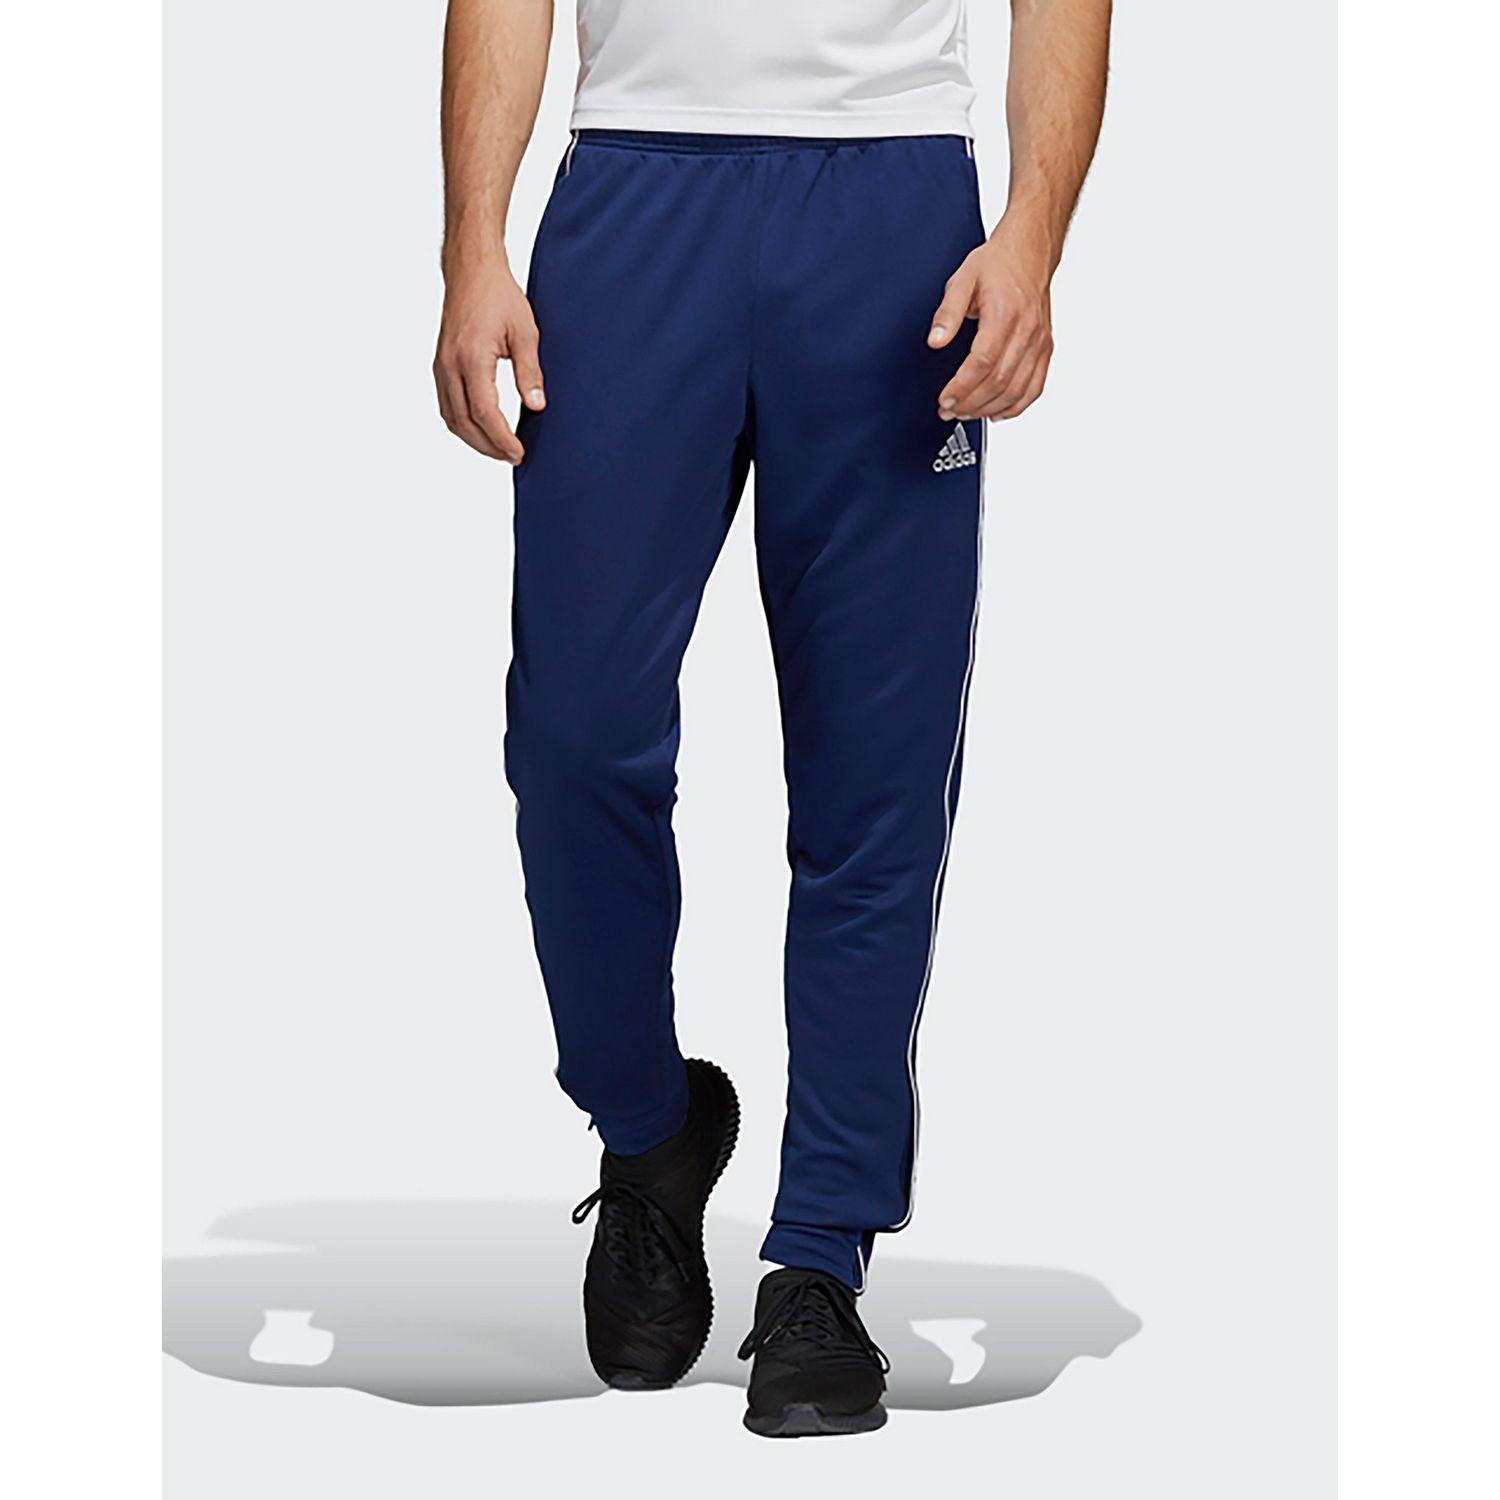 adidas Originals Core 18 Training Tracksuit Bottoms in Blue for Men - Lyst